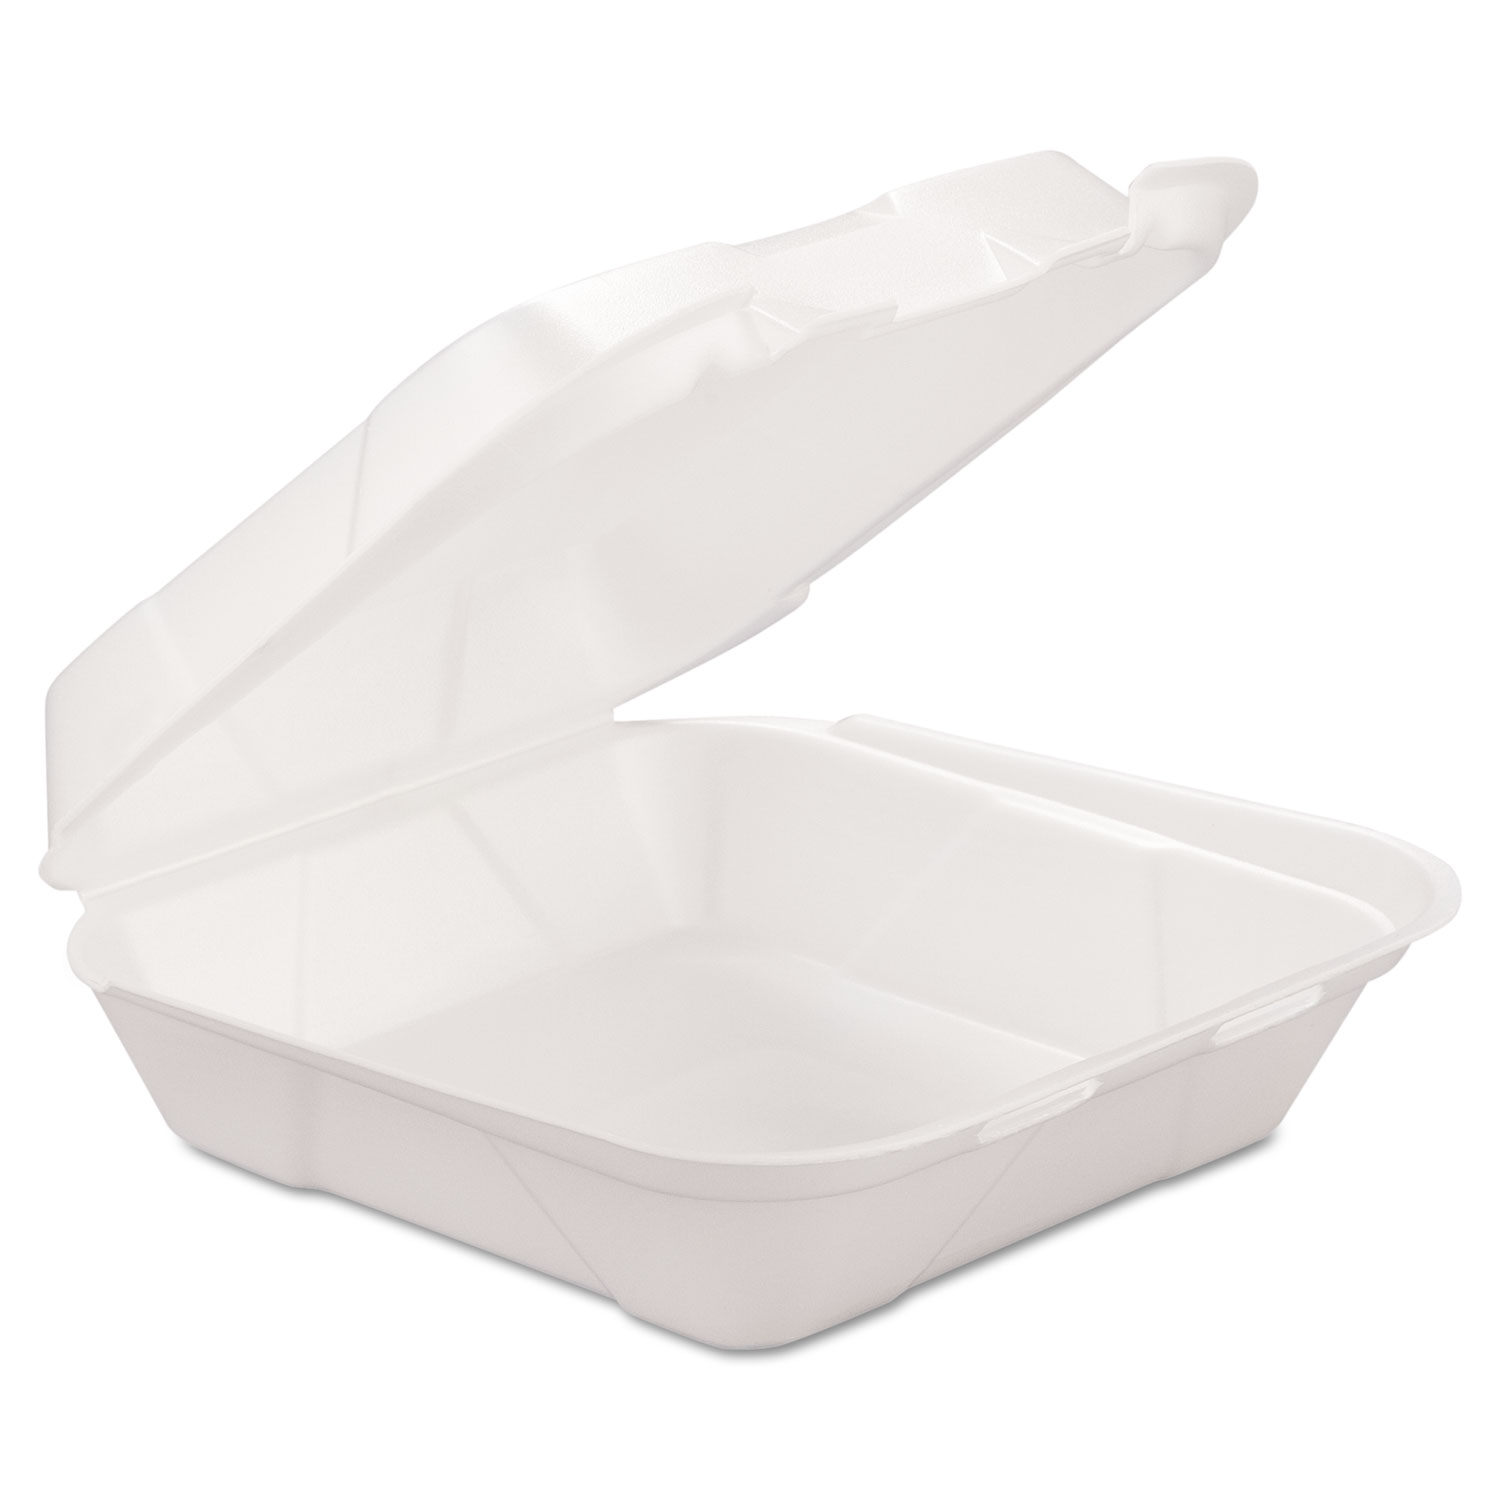 Foam Hinged Carryout Container, 1-Comp, White, 8 X 8 1/4 X 3, 200/Carton